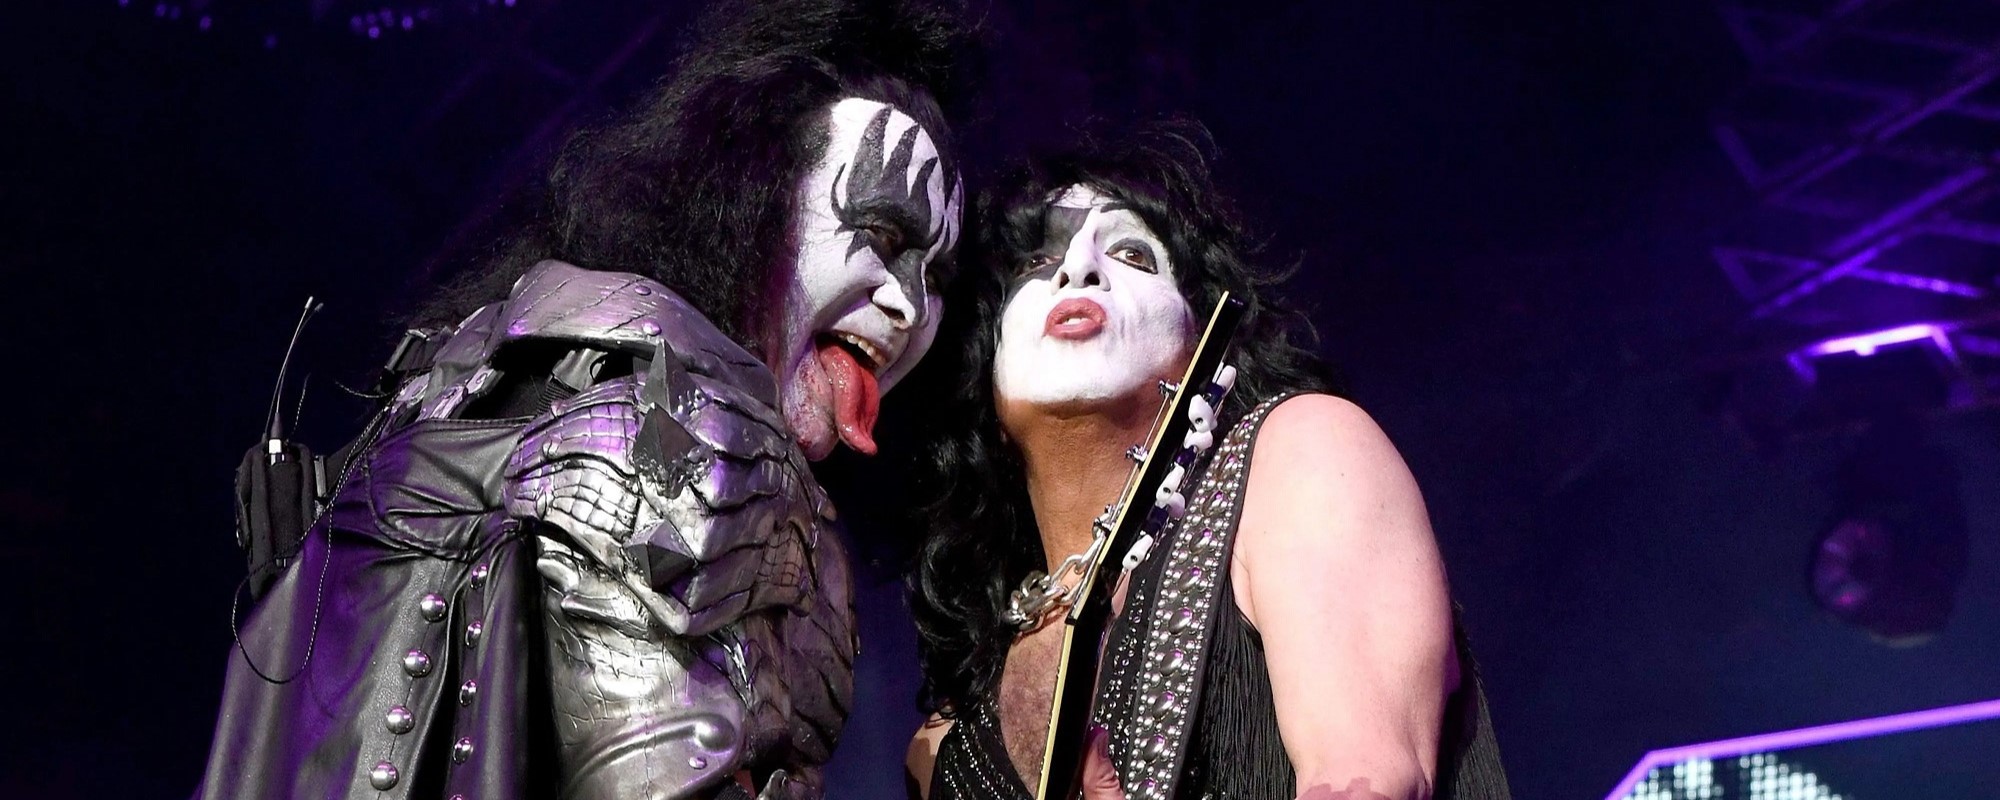 Gene Simmons Says KISS Bandmate Paul Stanley Doesn’t Get “the Respect and Recognition He Deserves” as a Guitarist